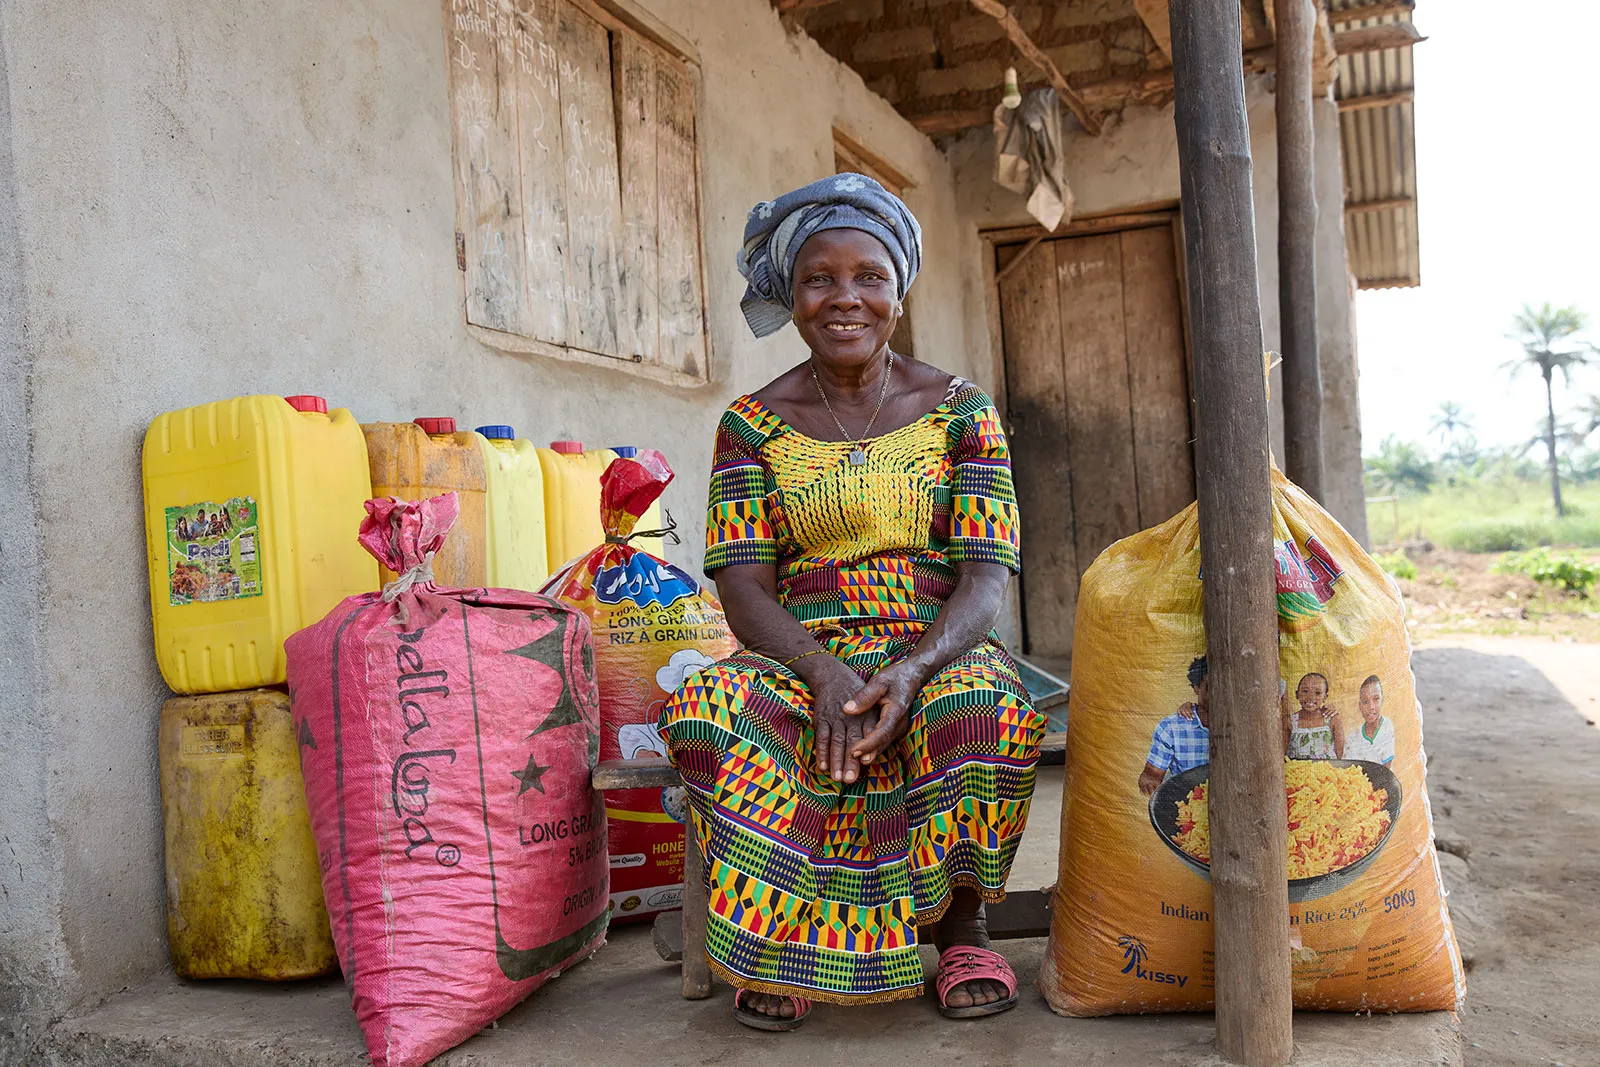 A woman sits outside surrounded by bags of rice.